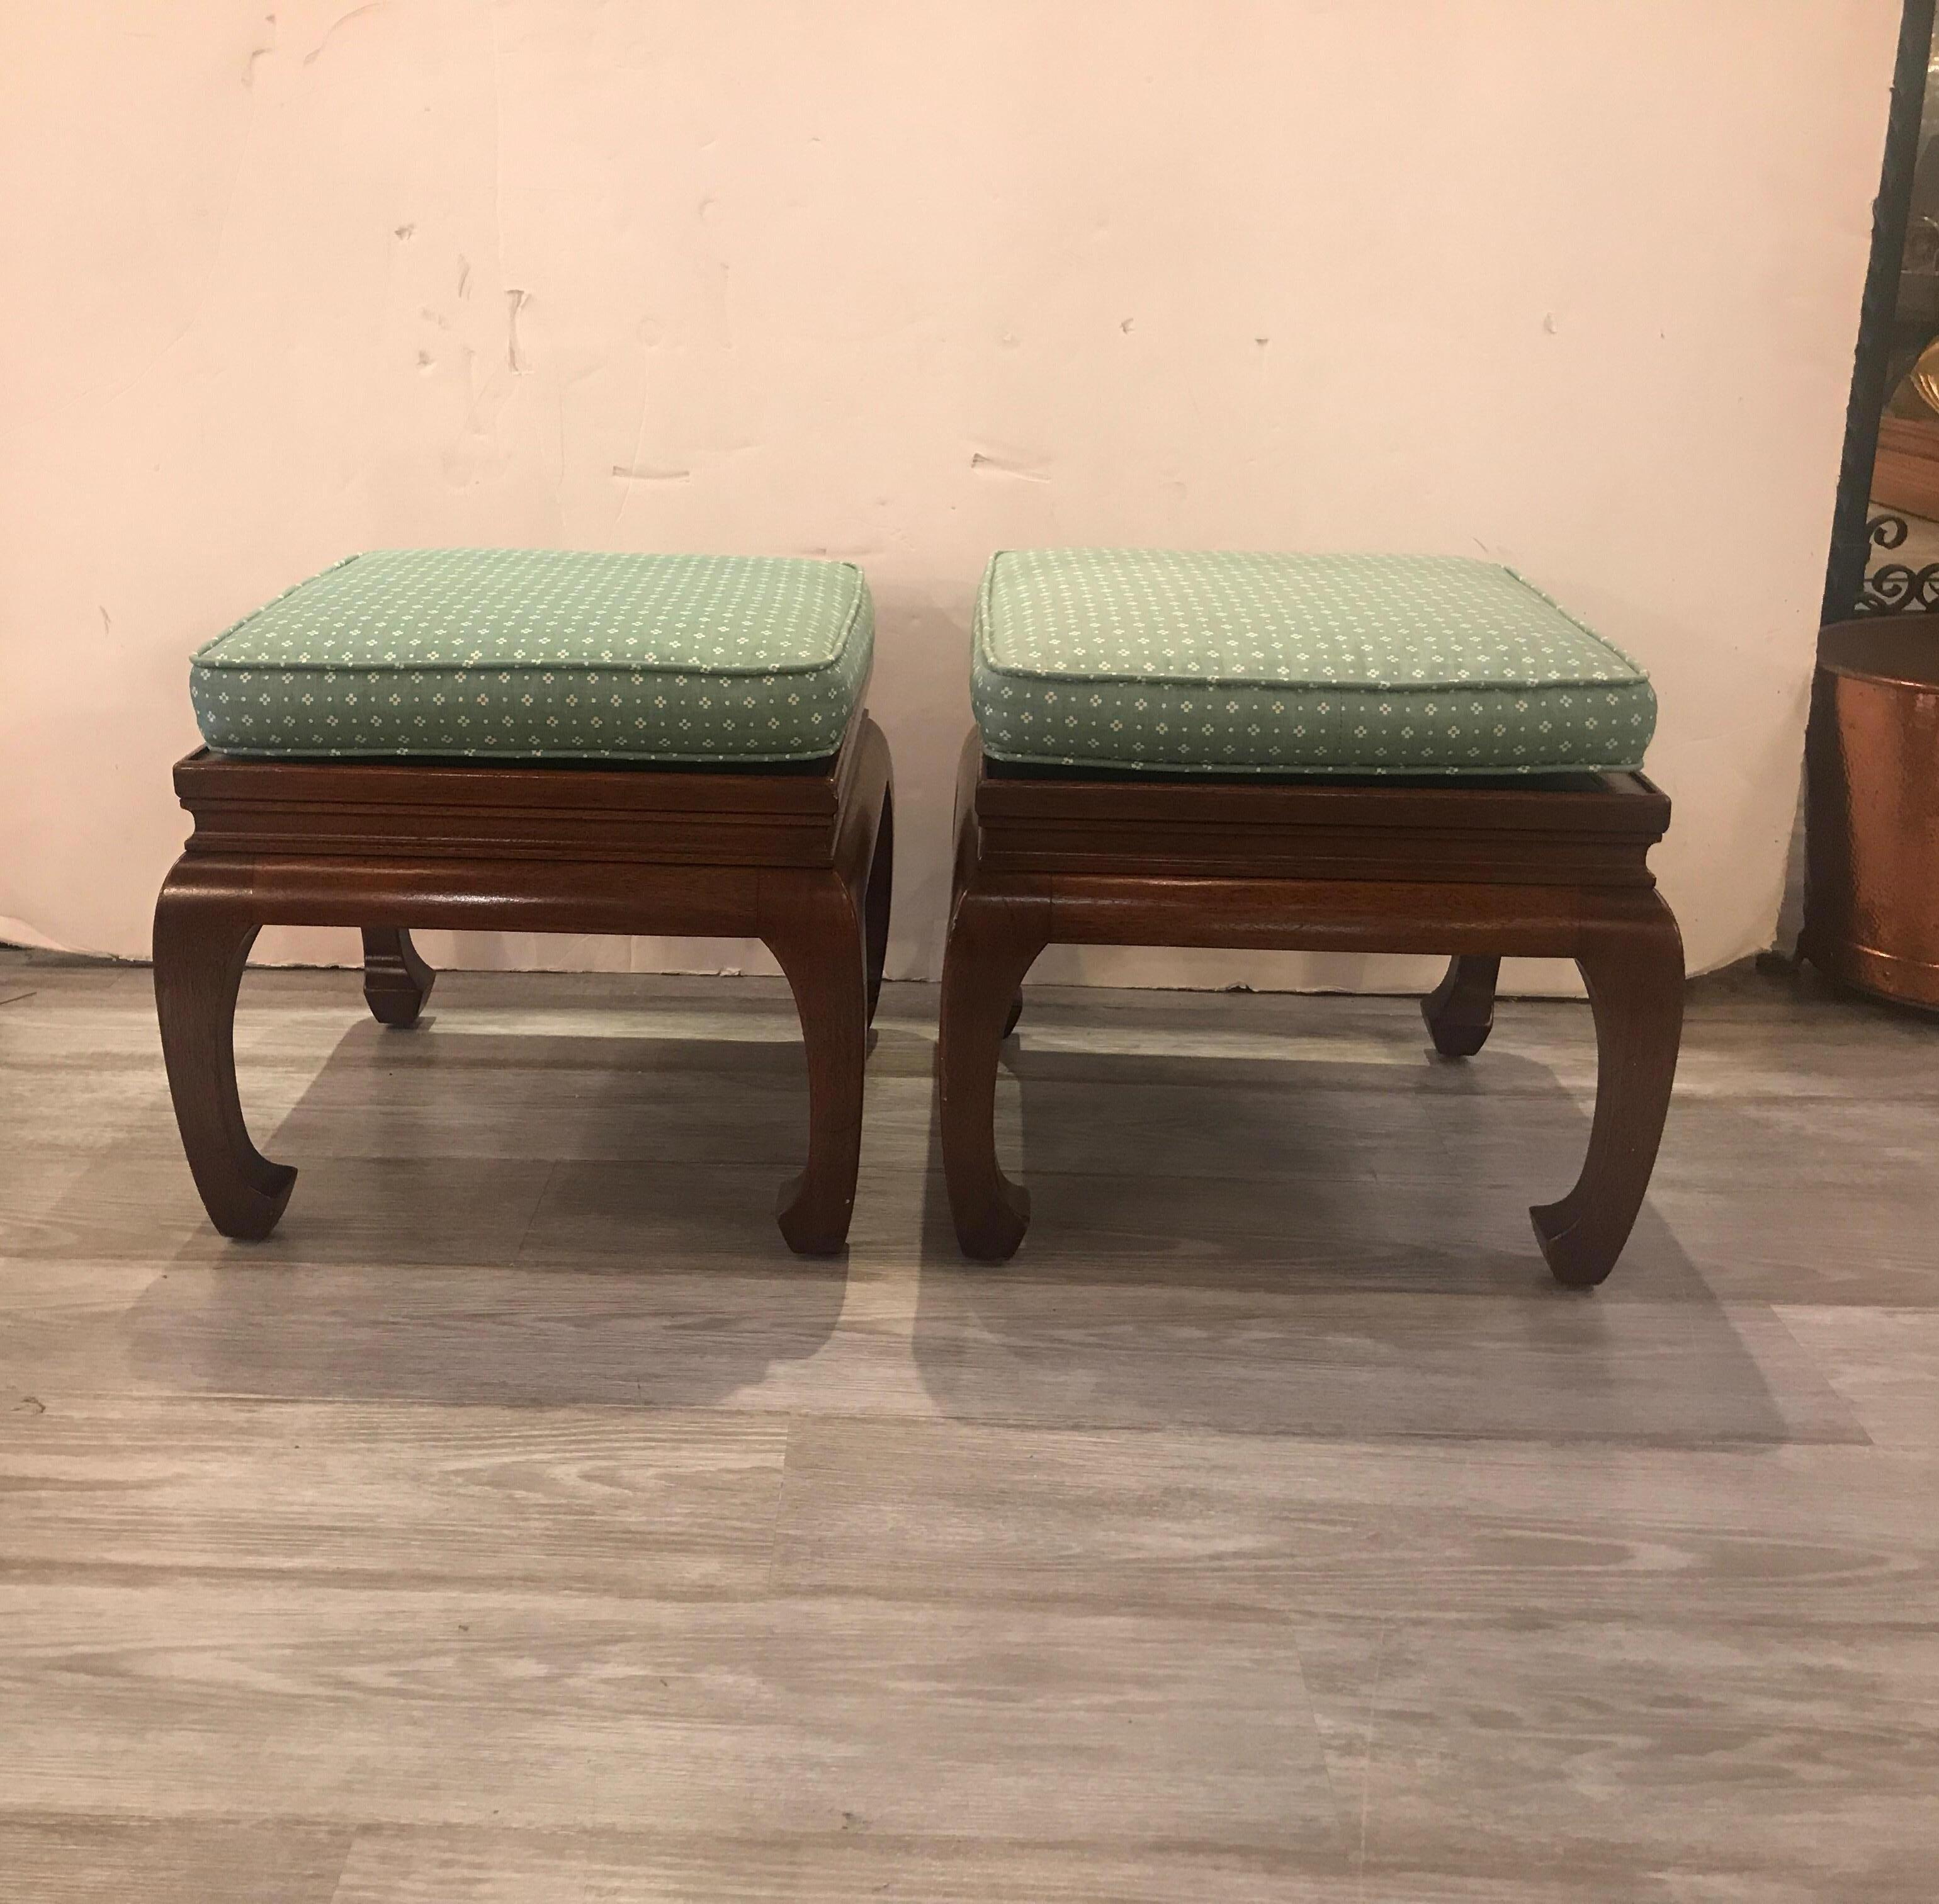 A pair of Classic Asian styled walnut benches or stands. Vintage 1970s with the traditional turned under trunk legs. The stands or benches come with a seat cushion with a clean fabric which should be recovered to suit the new interior. The height